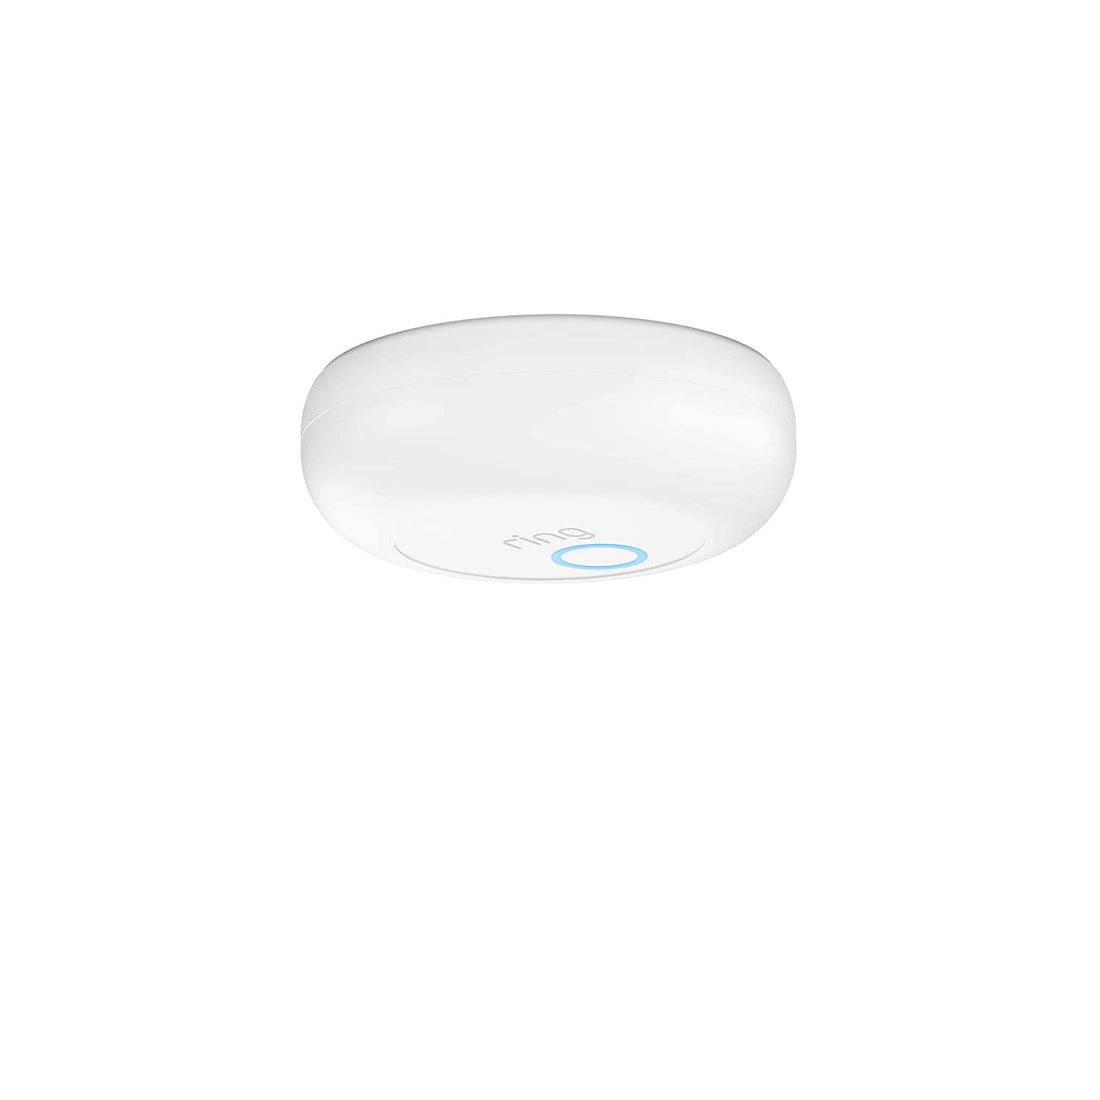 Ring Alarm Smoke and CO Listener - White (New)